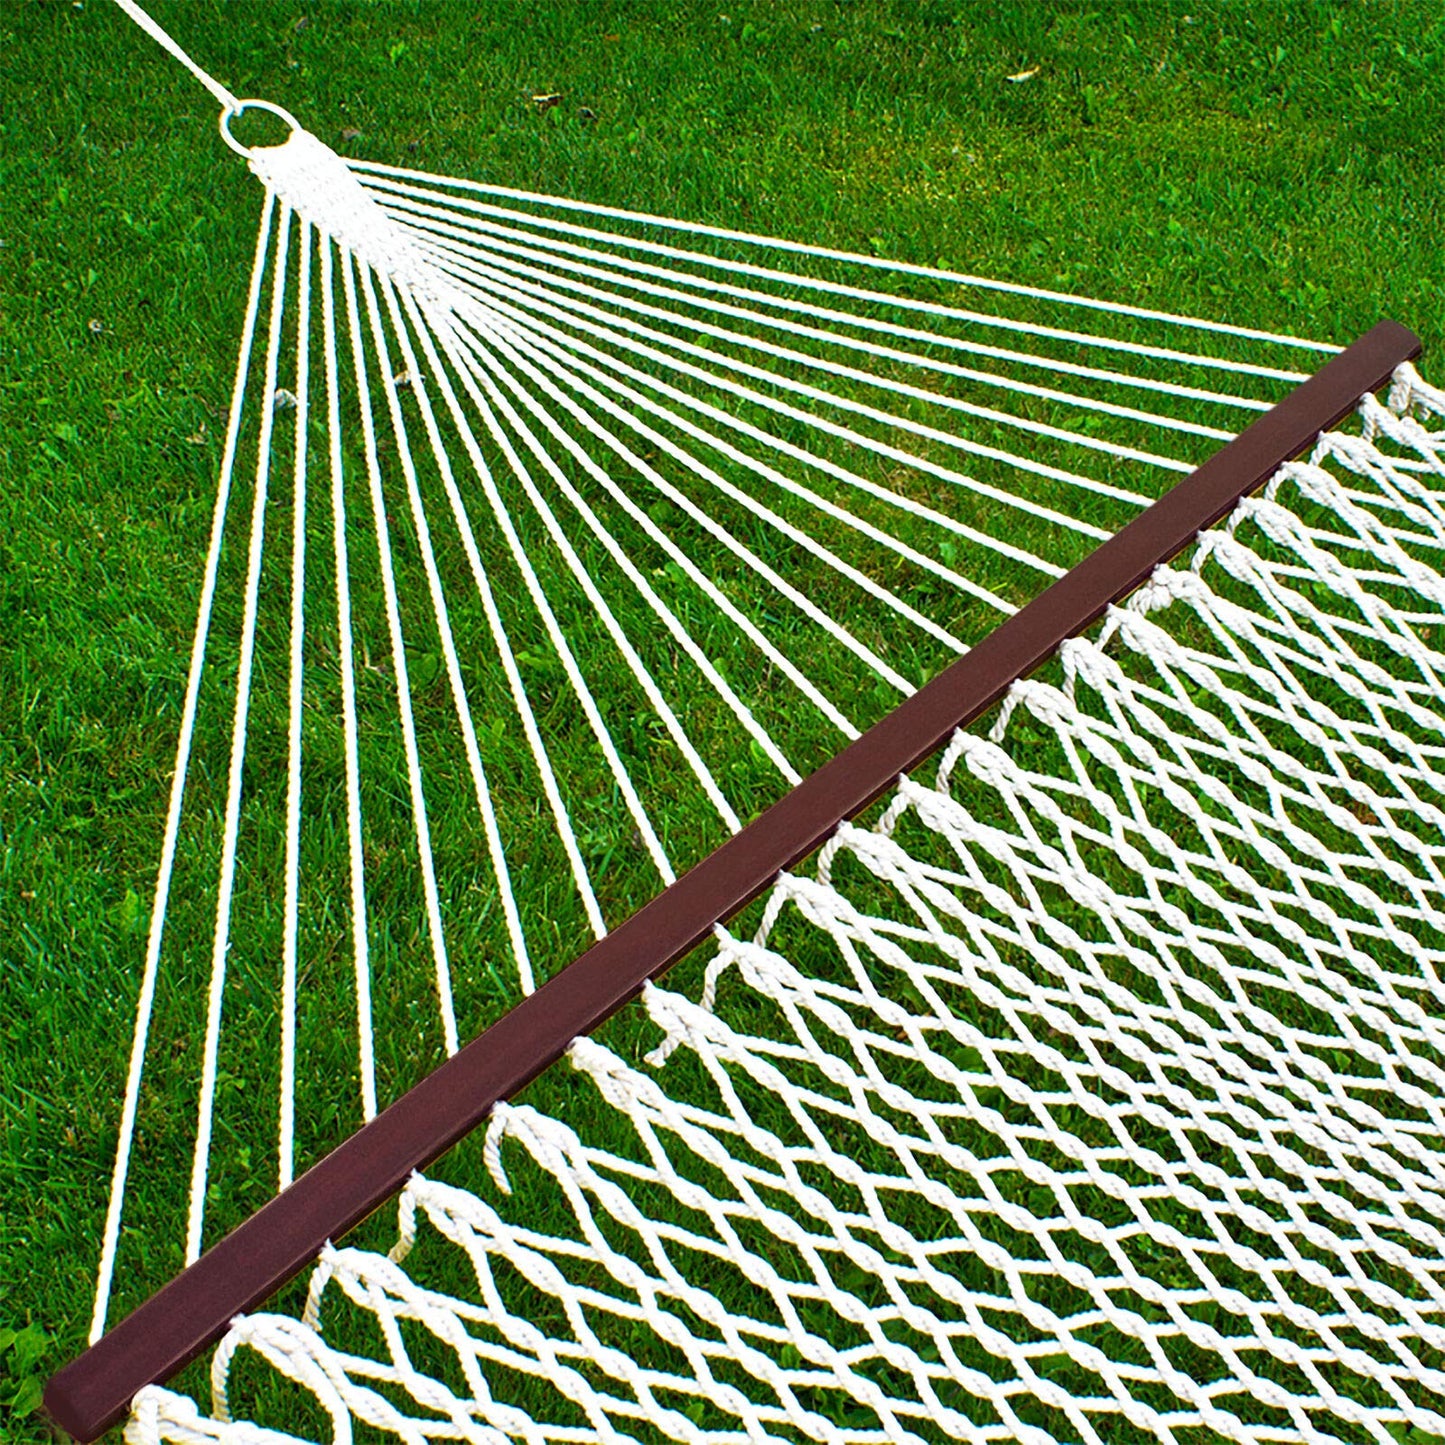 Cotton Rope Double Hammock with Carrying Case & Spreader Bars - Miracle9